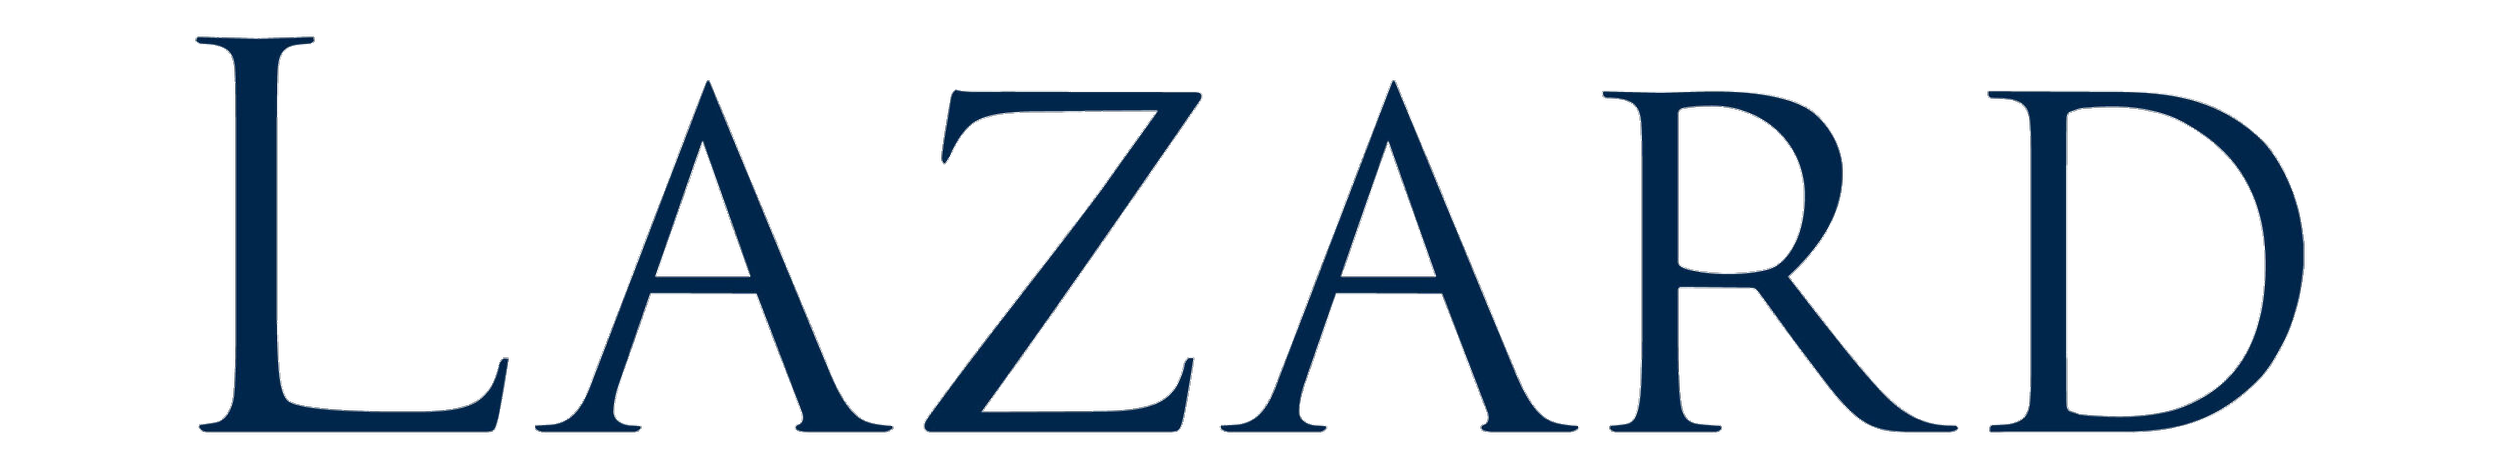 Lazard_Logo-scaled.png